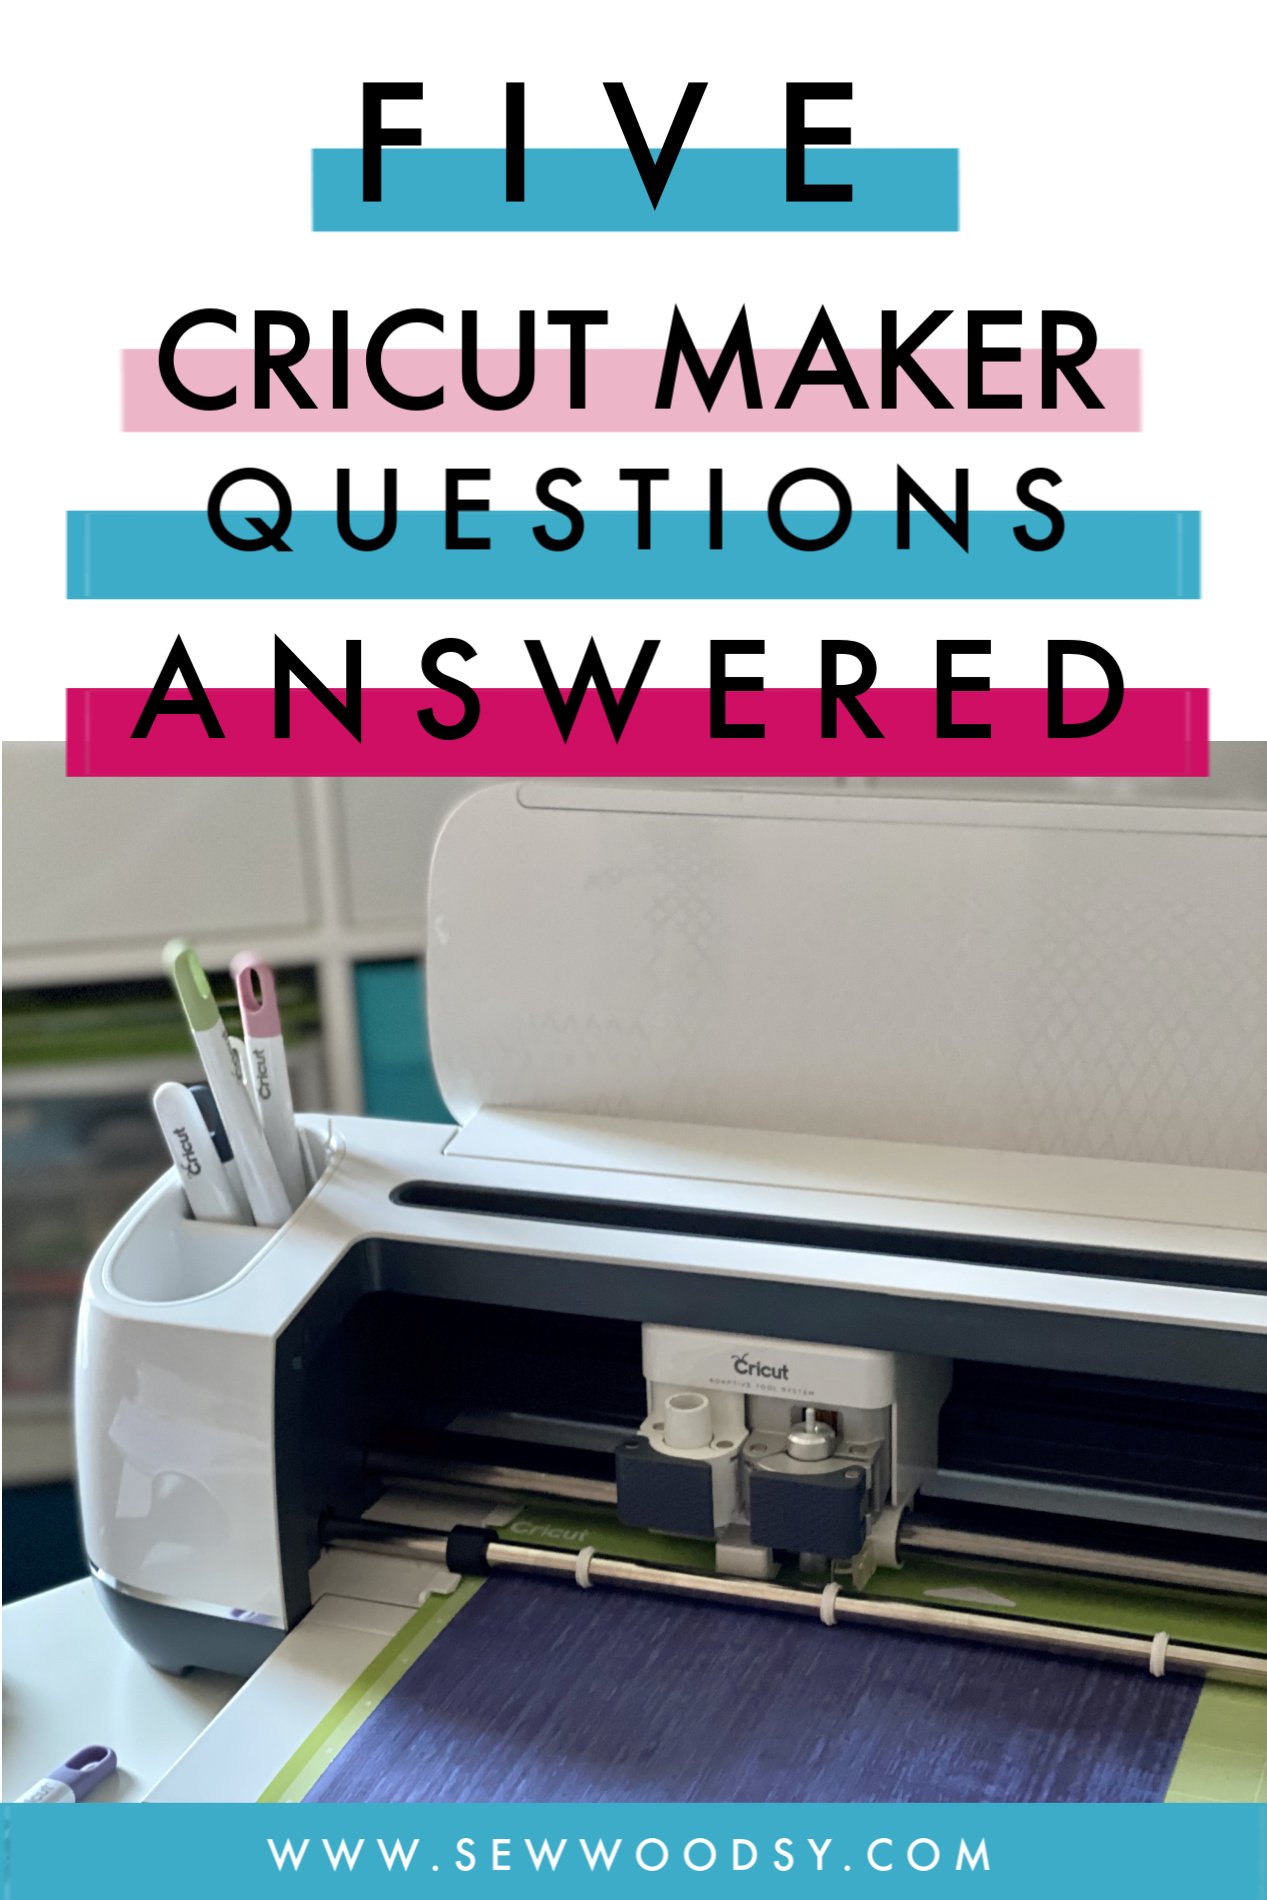 Photo of a Cricut Maker with text on image for Pinterest.